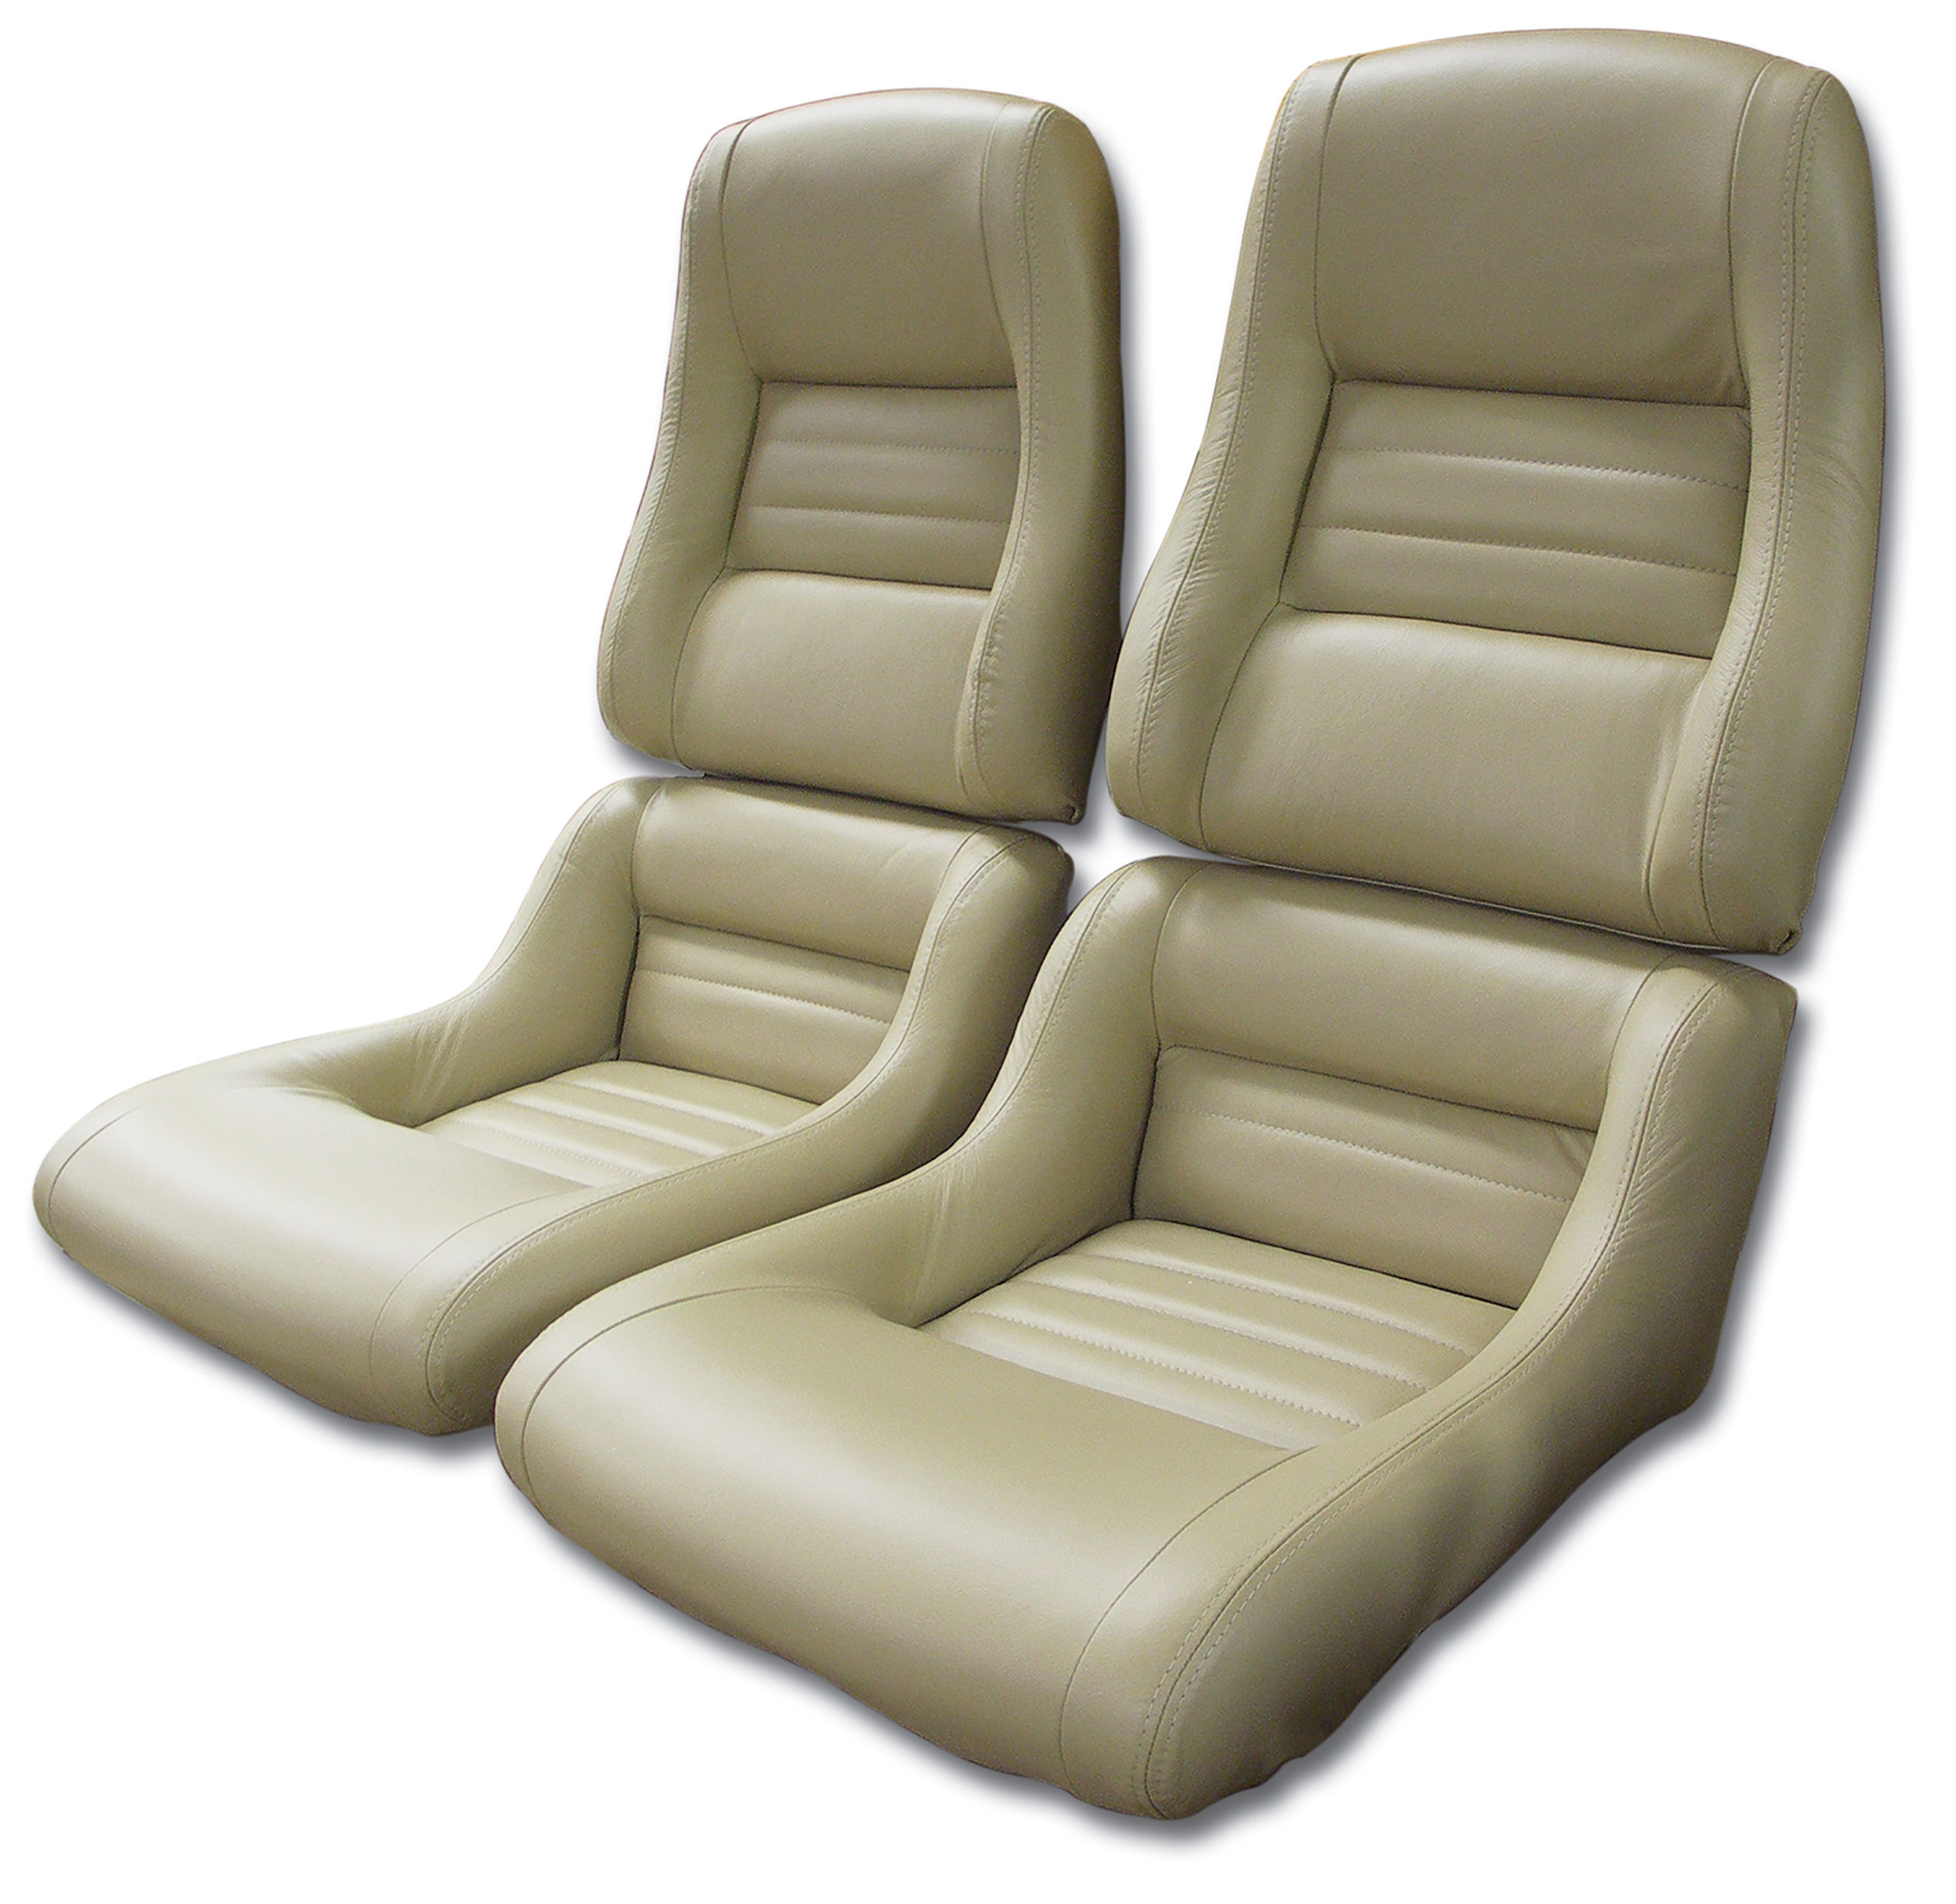 79-80 Corvette C3 Leather Seat Covers Oyster Leather/Vinyl Original 4" Bolster CA-419950 